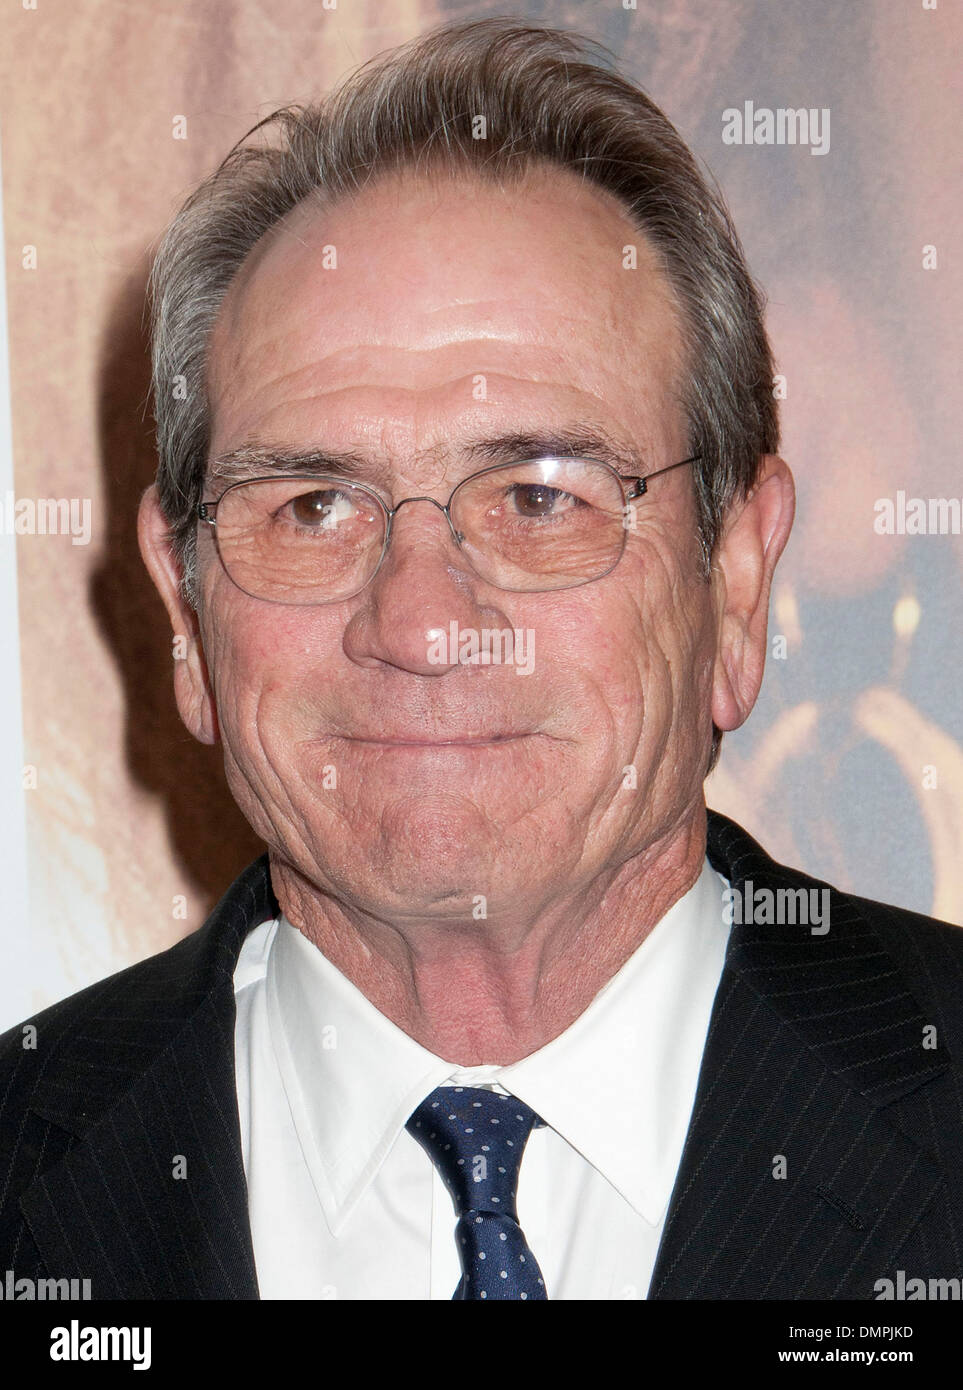 Tommy Lee Jones Premiere of 'Hope Springs' at the SVA Theater. New York City, USA - 06.08.12 Stock Photo